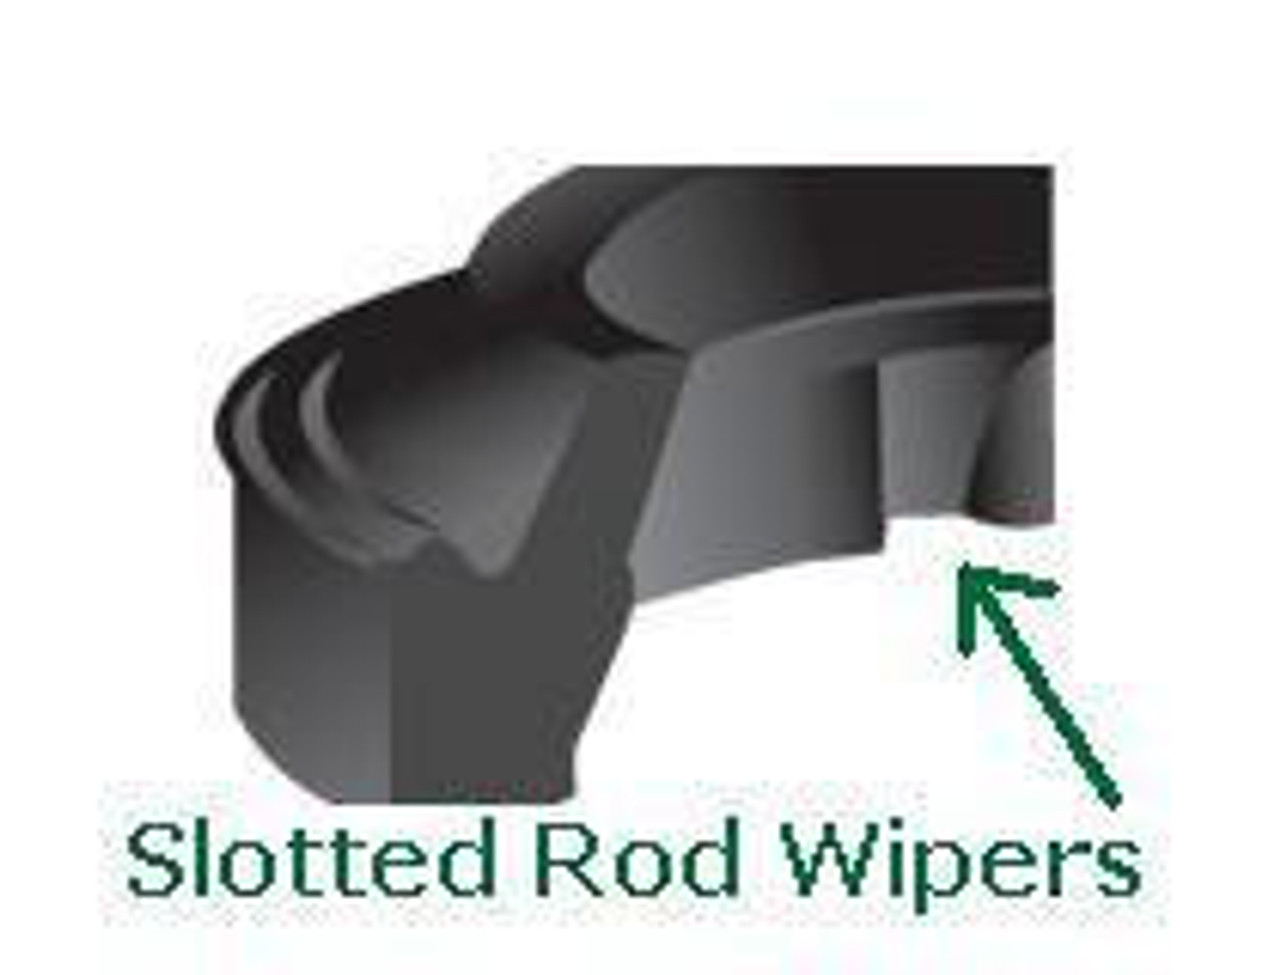 Rod Wipers Slotted for 5/8" Price for 1 pc